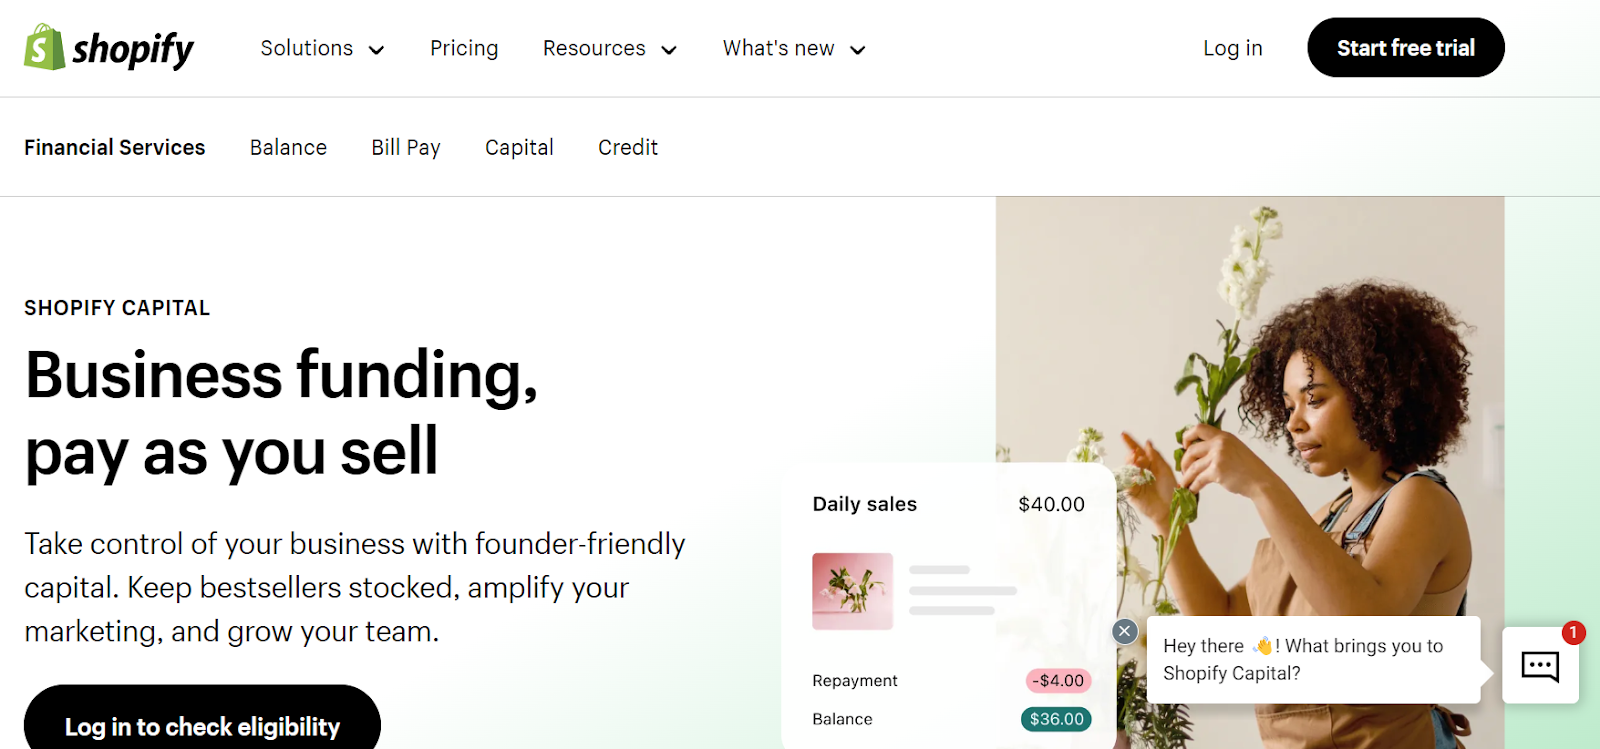 Shopify Capital is a financing service provided by Shopify